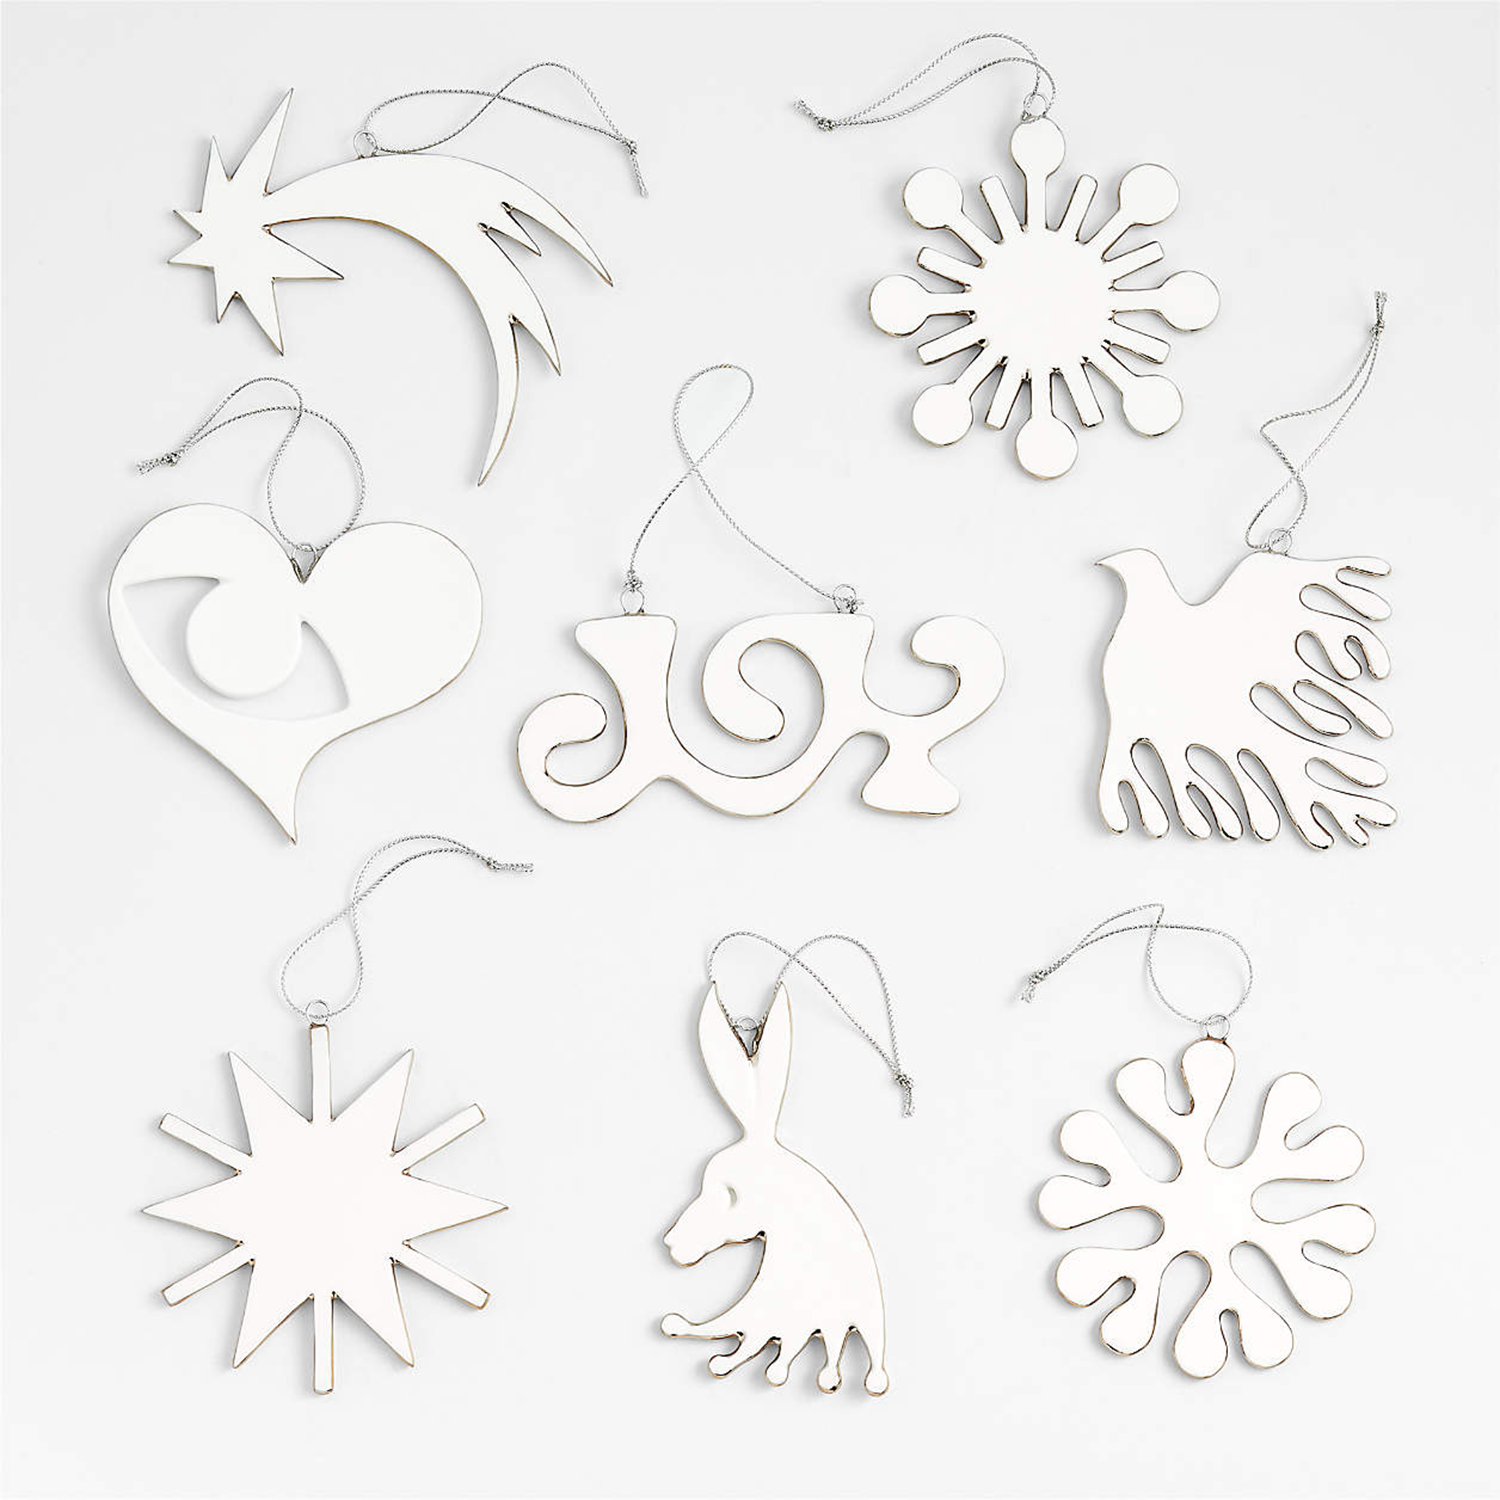 Celebratory Accents Platinum-Edged White Porcelain Christmas Ornaments, Set of 8 by Lucia Eames